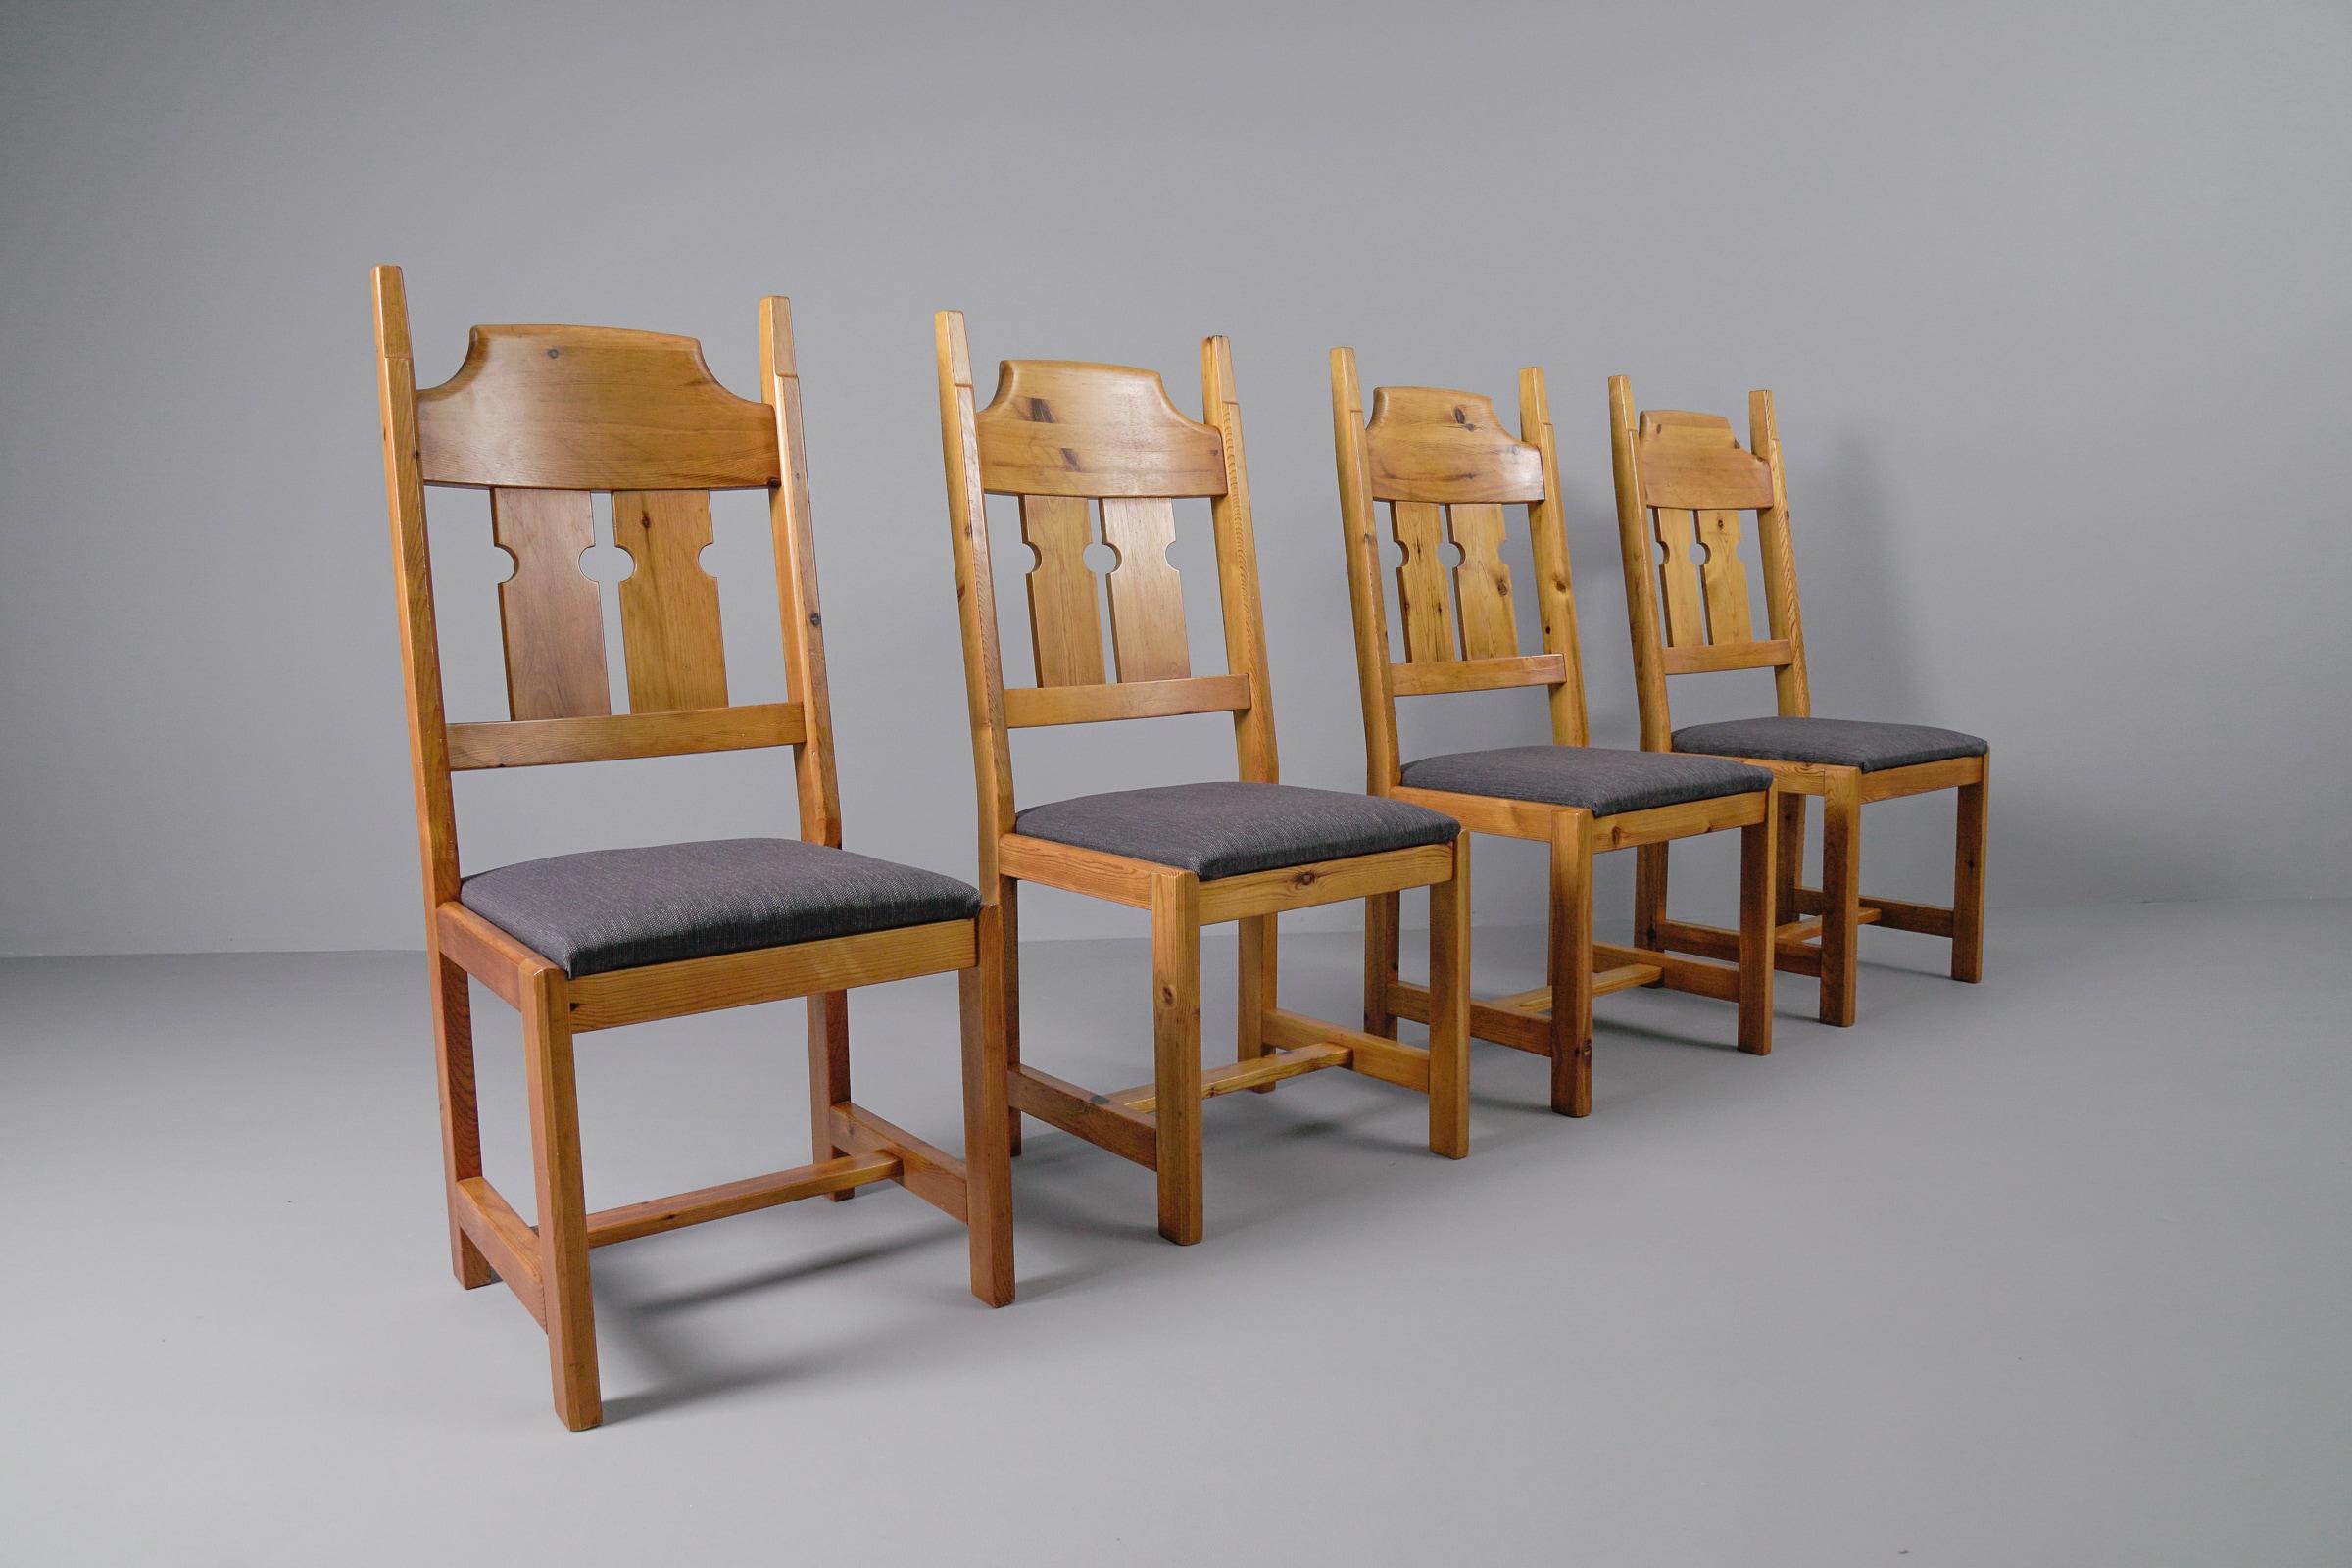  Set of 4 Swedish Pine Chairs by Gilbert Marklund for Furusnickarn AB, 1970s In Good Condition For Sale In Nürnberg, Bayern